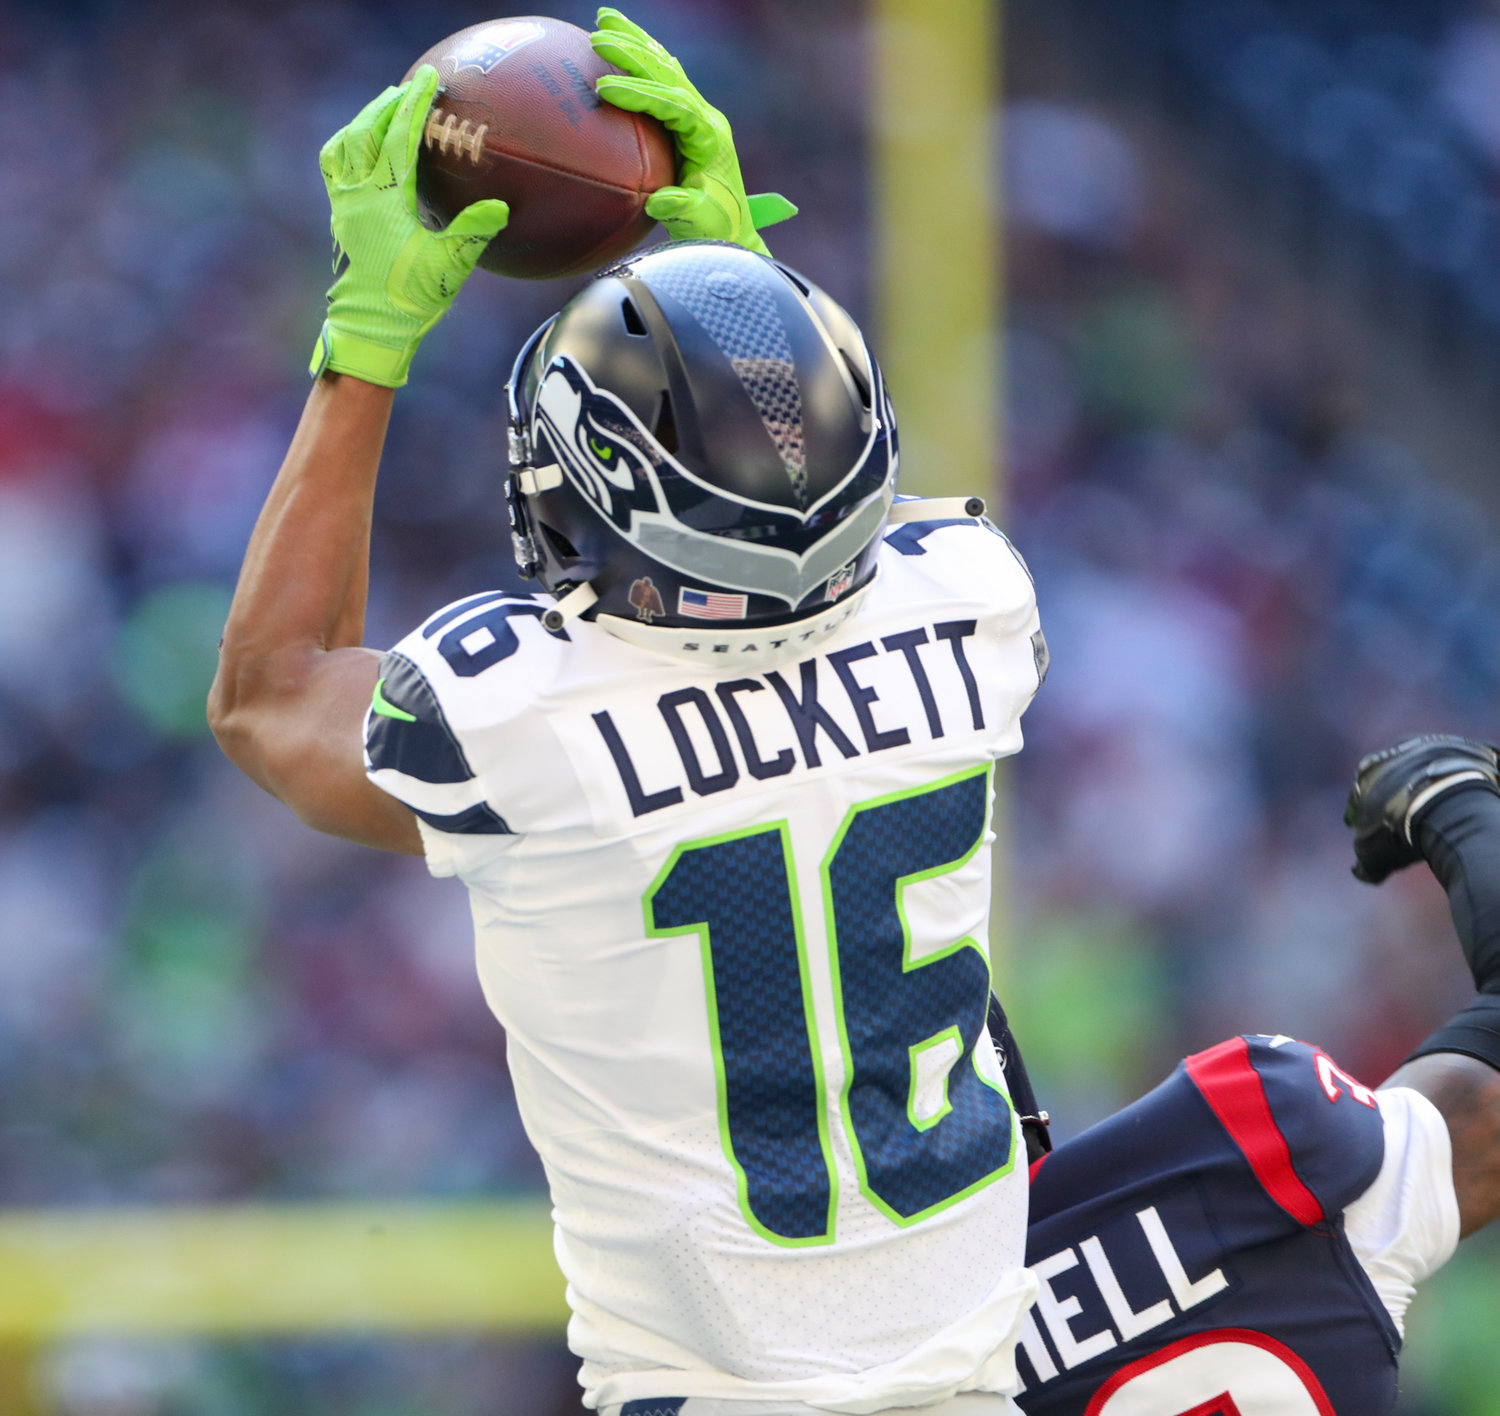 Seattle Seahawks wide receiver Tyler Lockett (16) brings in a pass during the first half of an NFL game between the Seahawks and the Texans on December 12, 2021 in Houston, Texas.